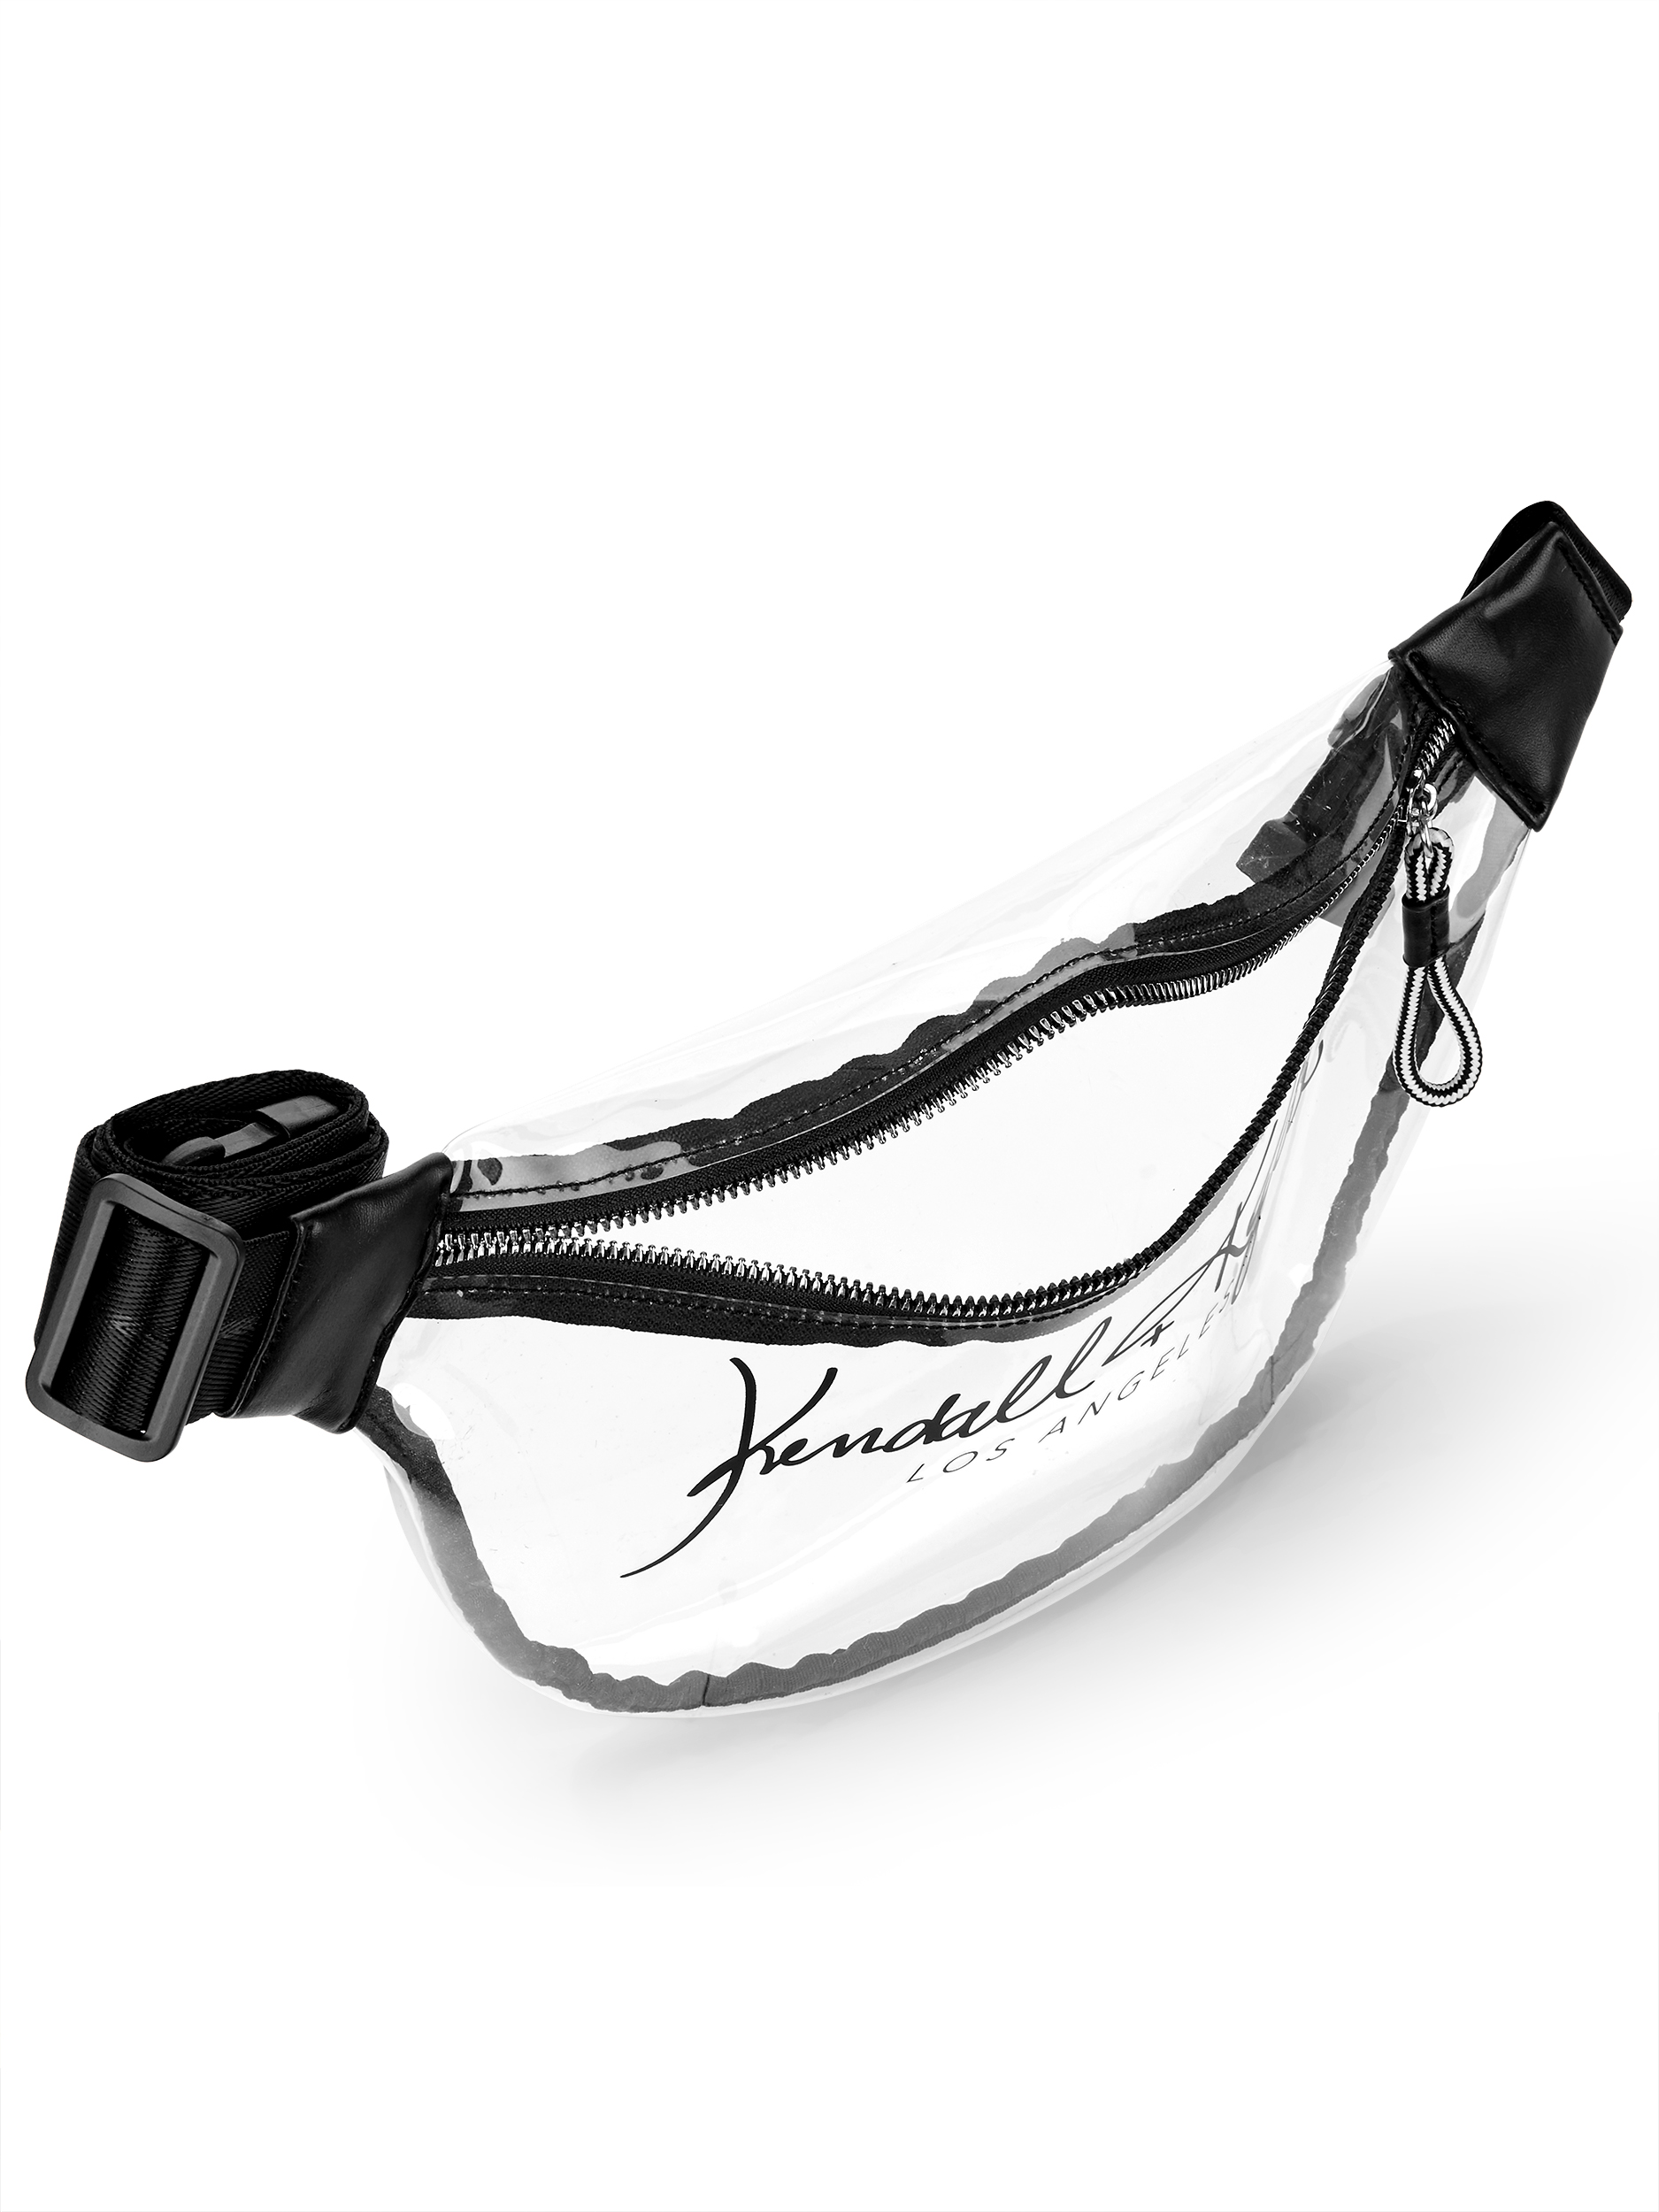 Kendall + Kylie for Walmart Clear Lucite Large Fanny Pack - image 5 of 5